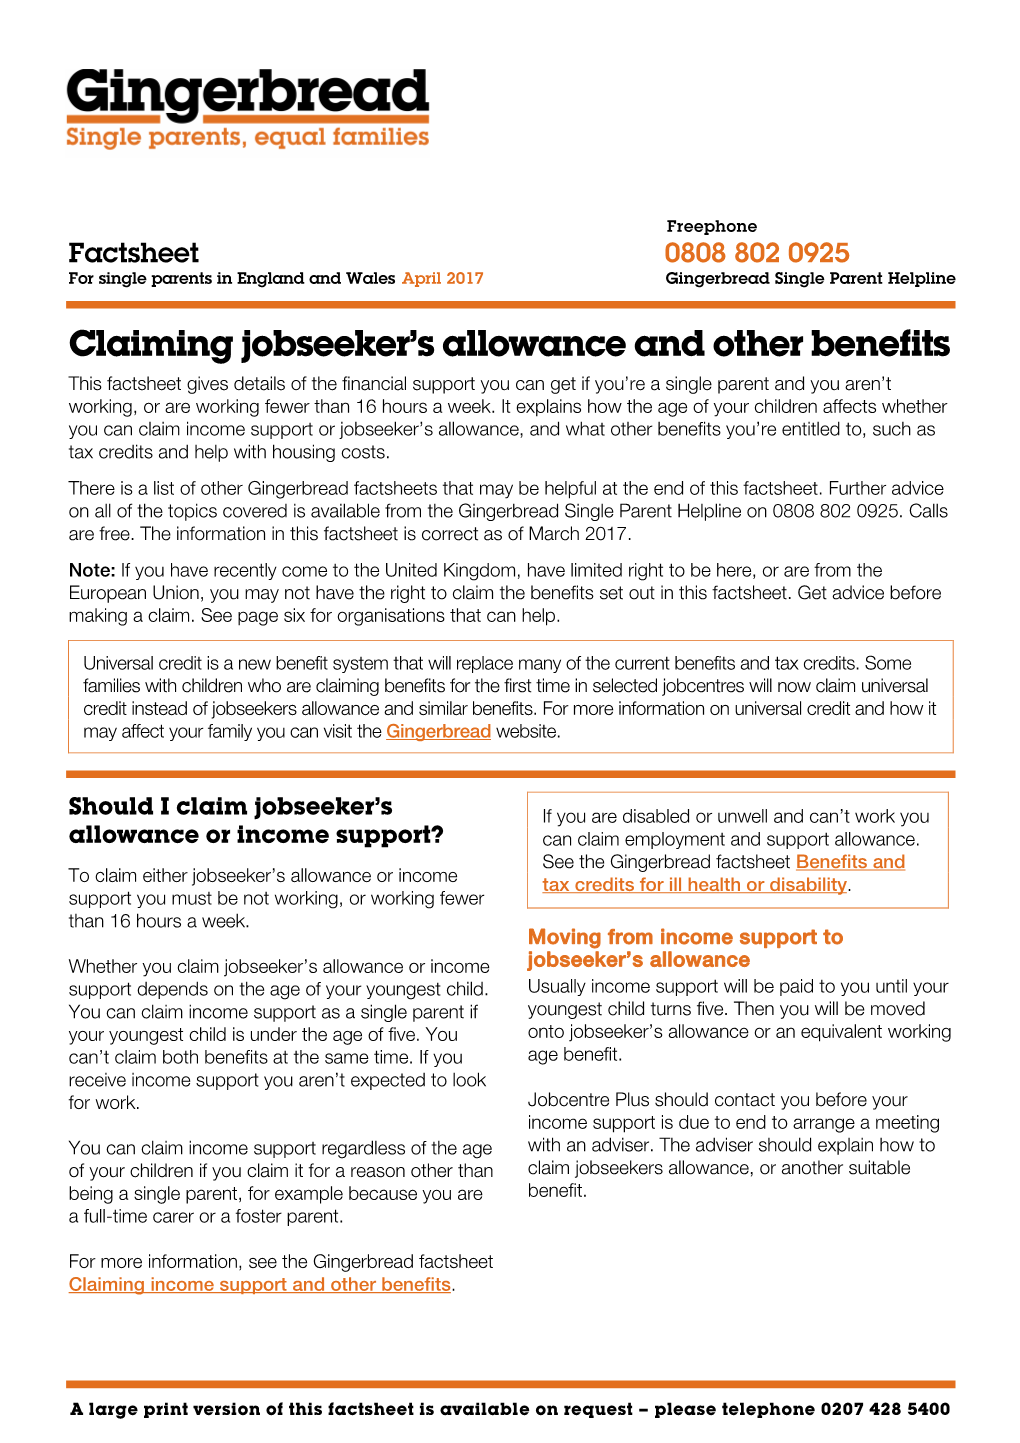 Claiming Jobseeker's Allowance and Other Benefits